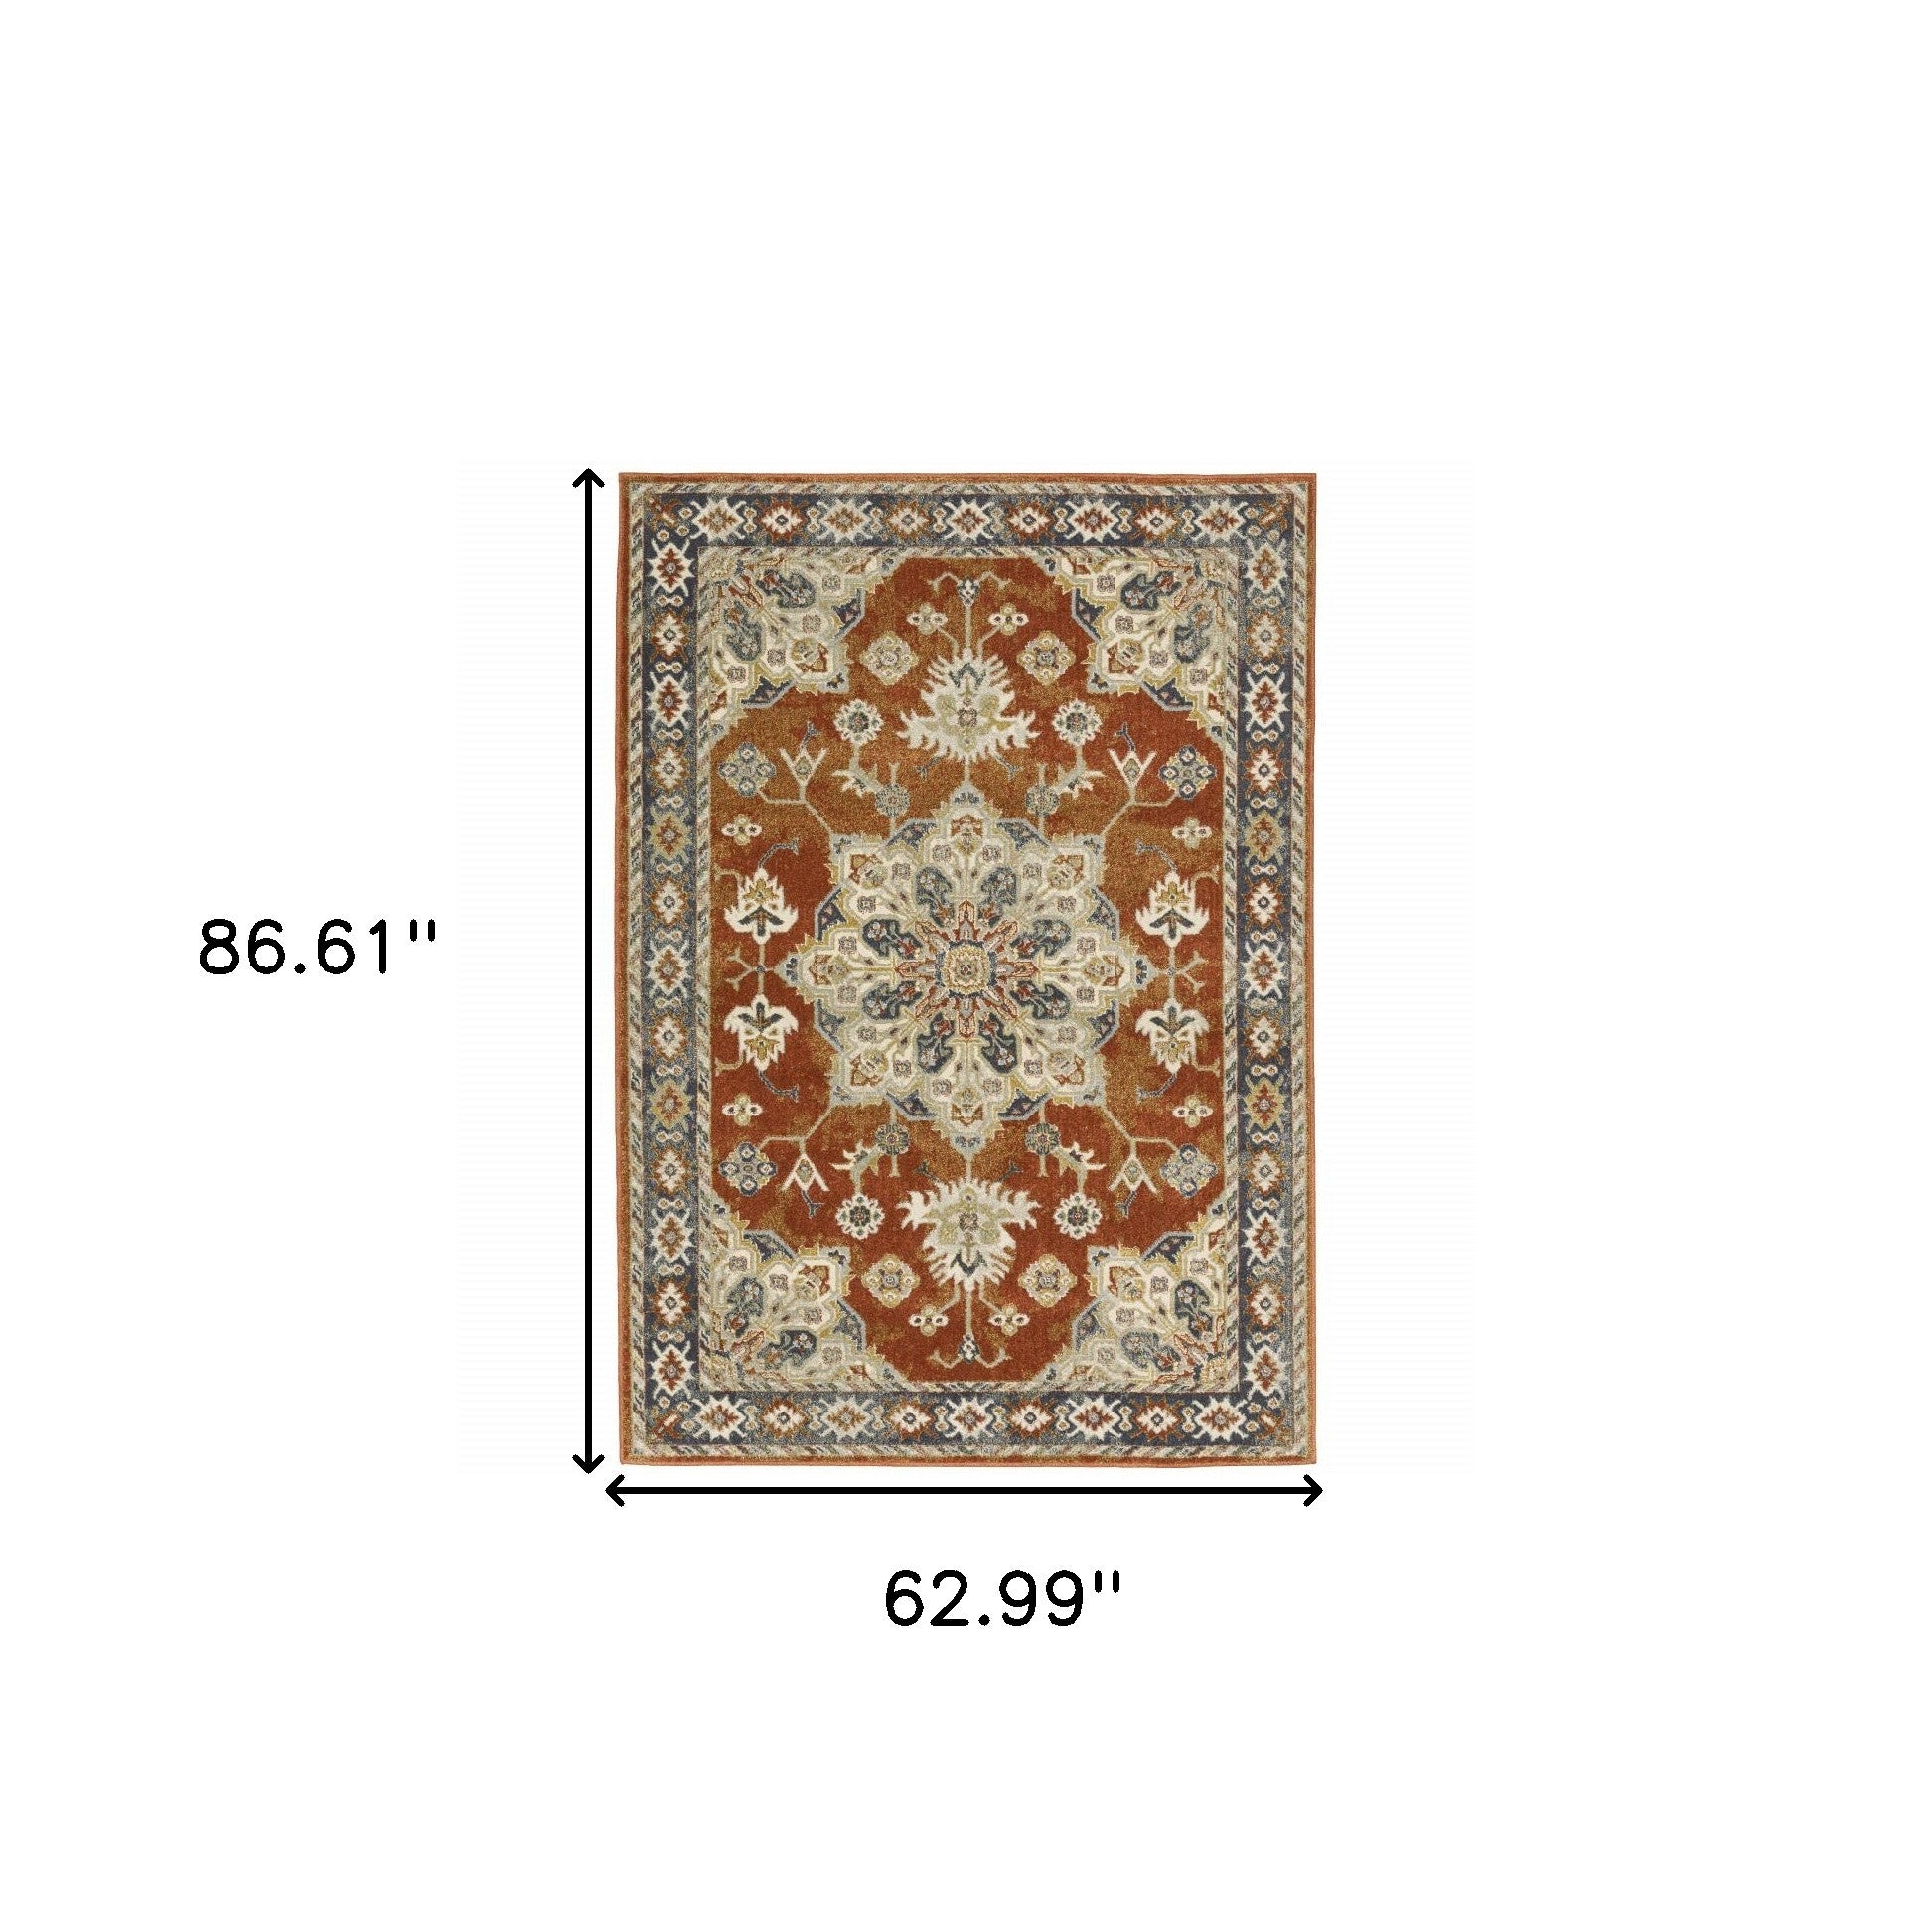 5' X 7' Rust Beige Teal Blue And Gold Oriental Power Loom Stain Resistant Area Rug